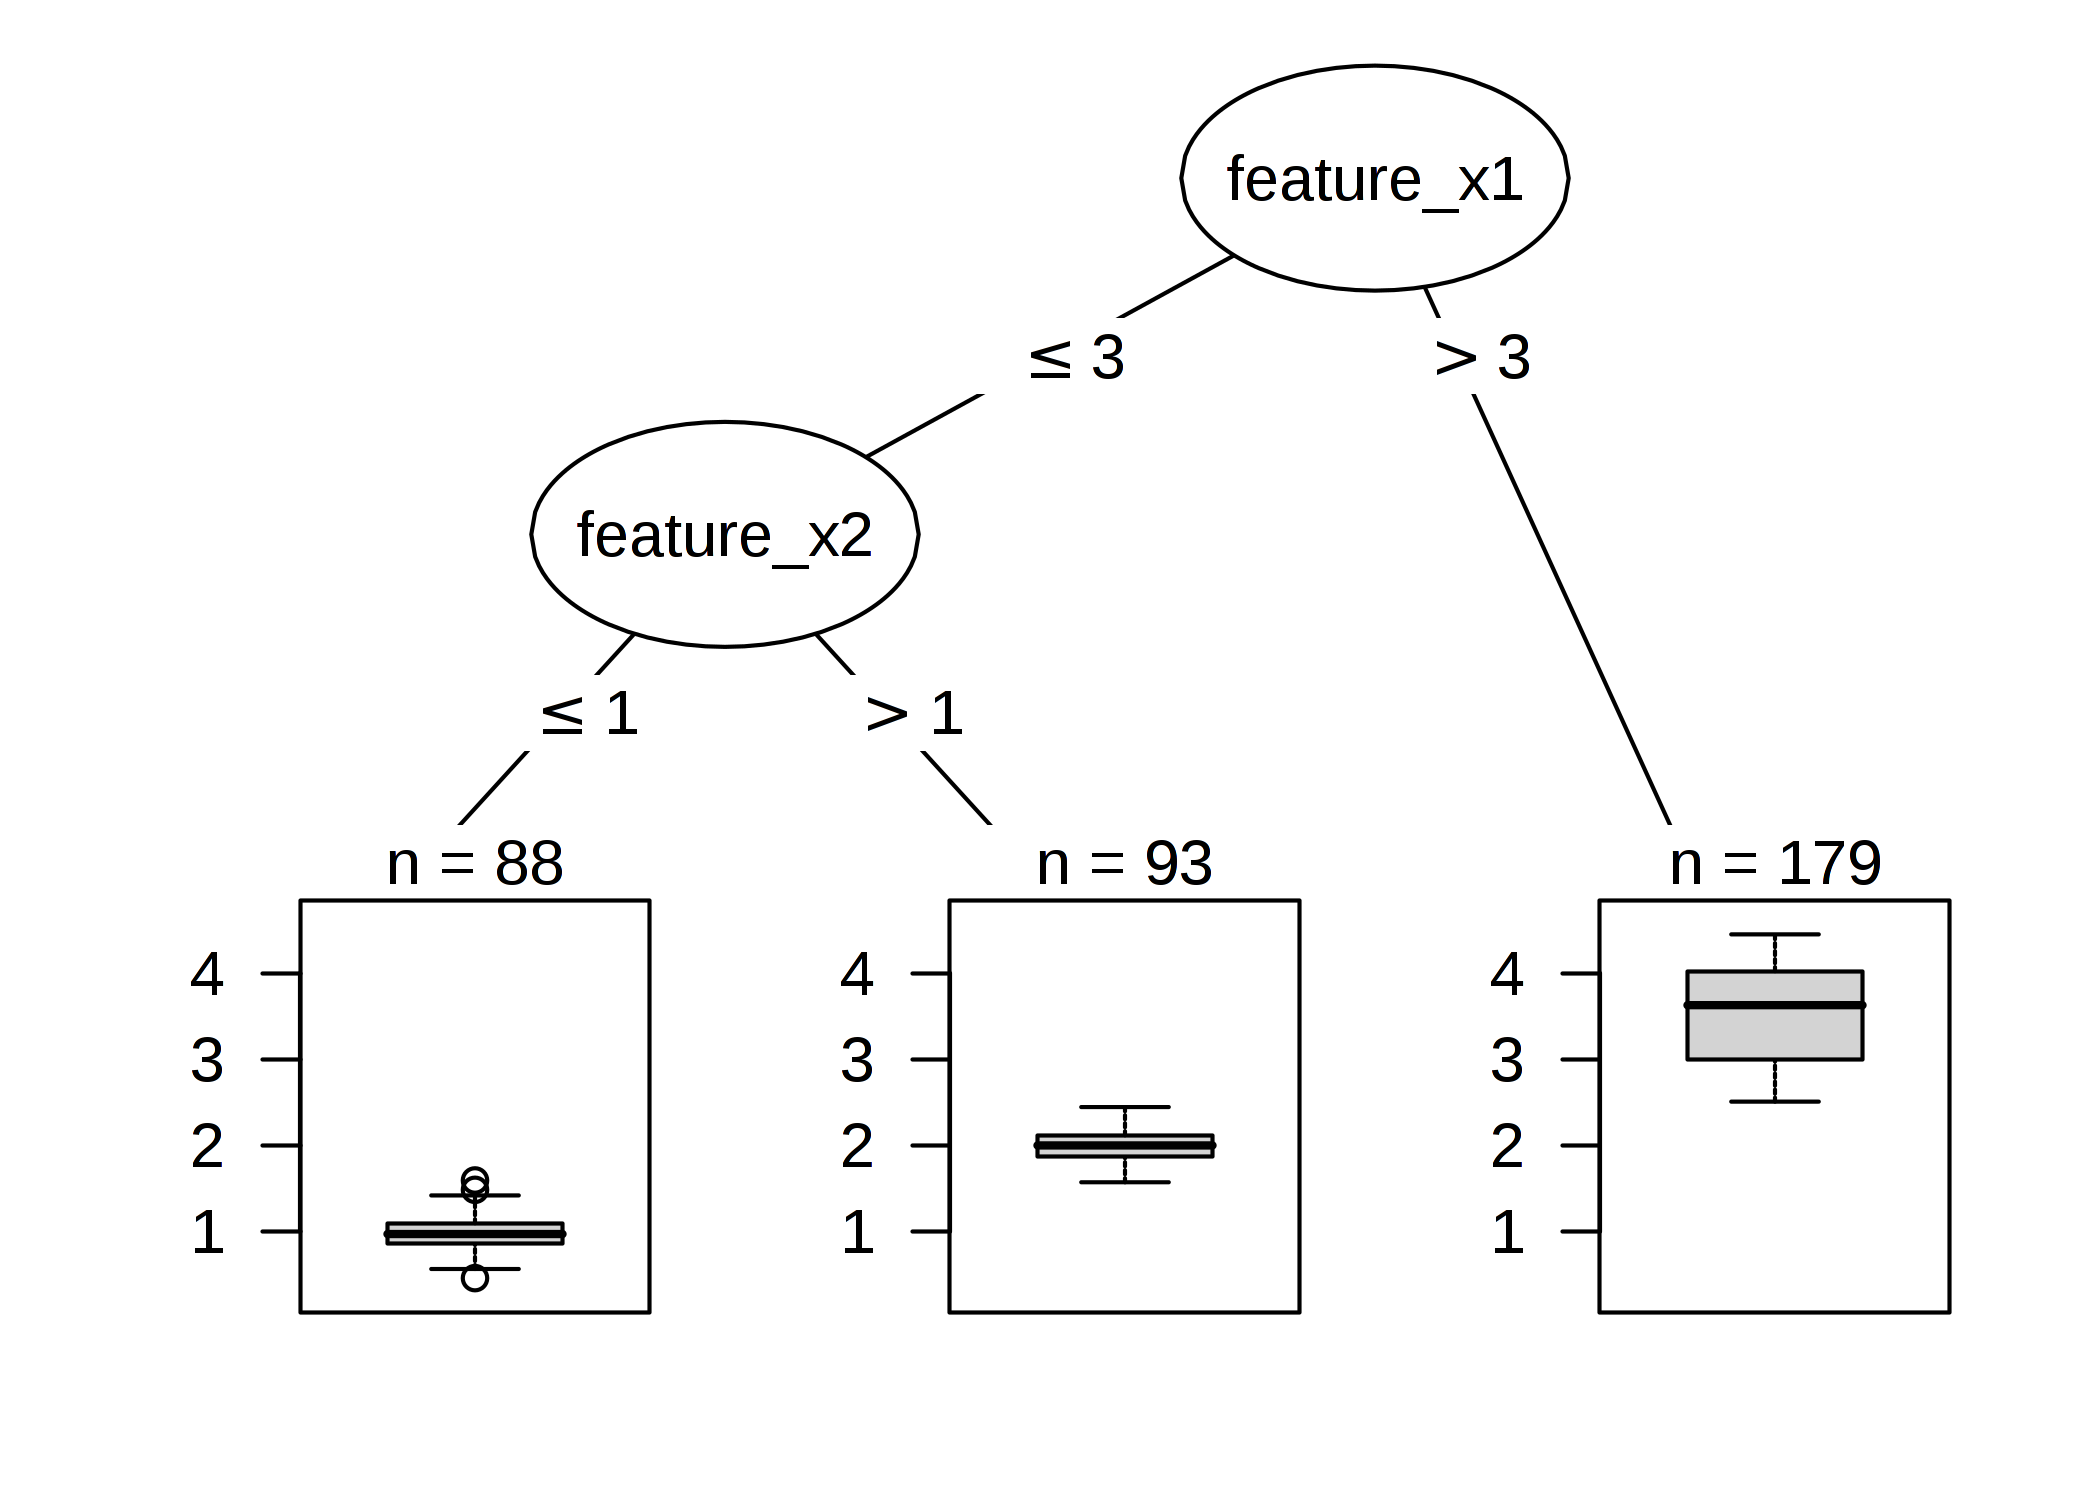 Decision tree with artificial data. Instances with a value greater than 3 for feature x1 end up in node 5. All other instances are assigned to node 3 or node 4, depending on whether values of feature x2  exceed 1.